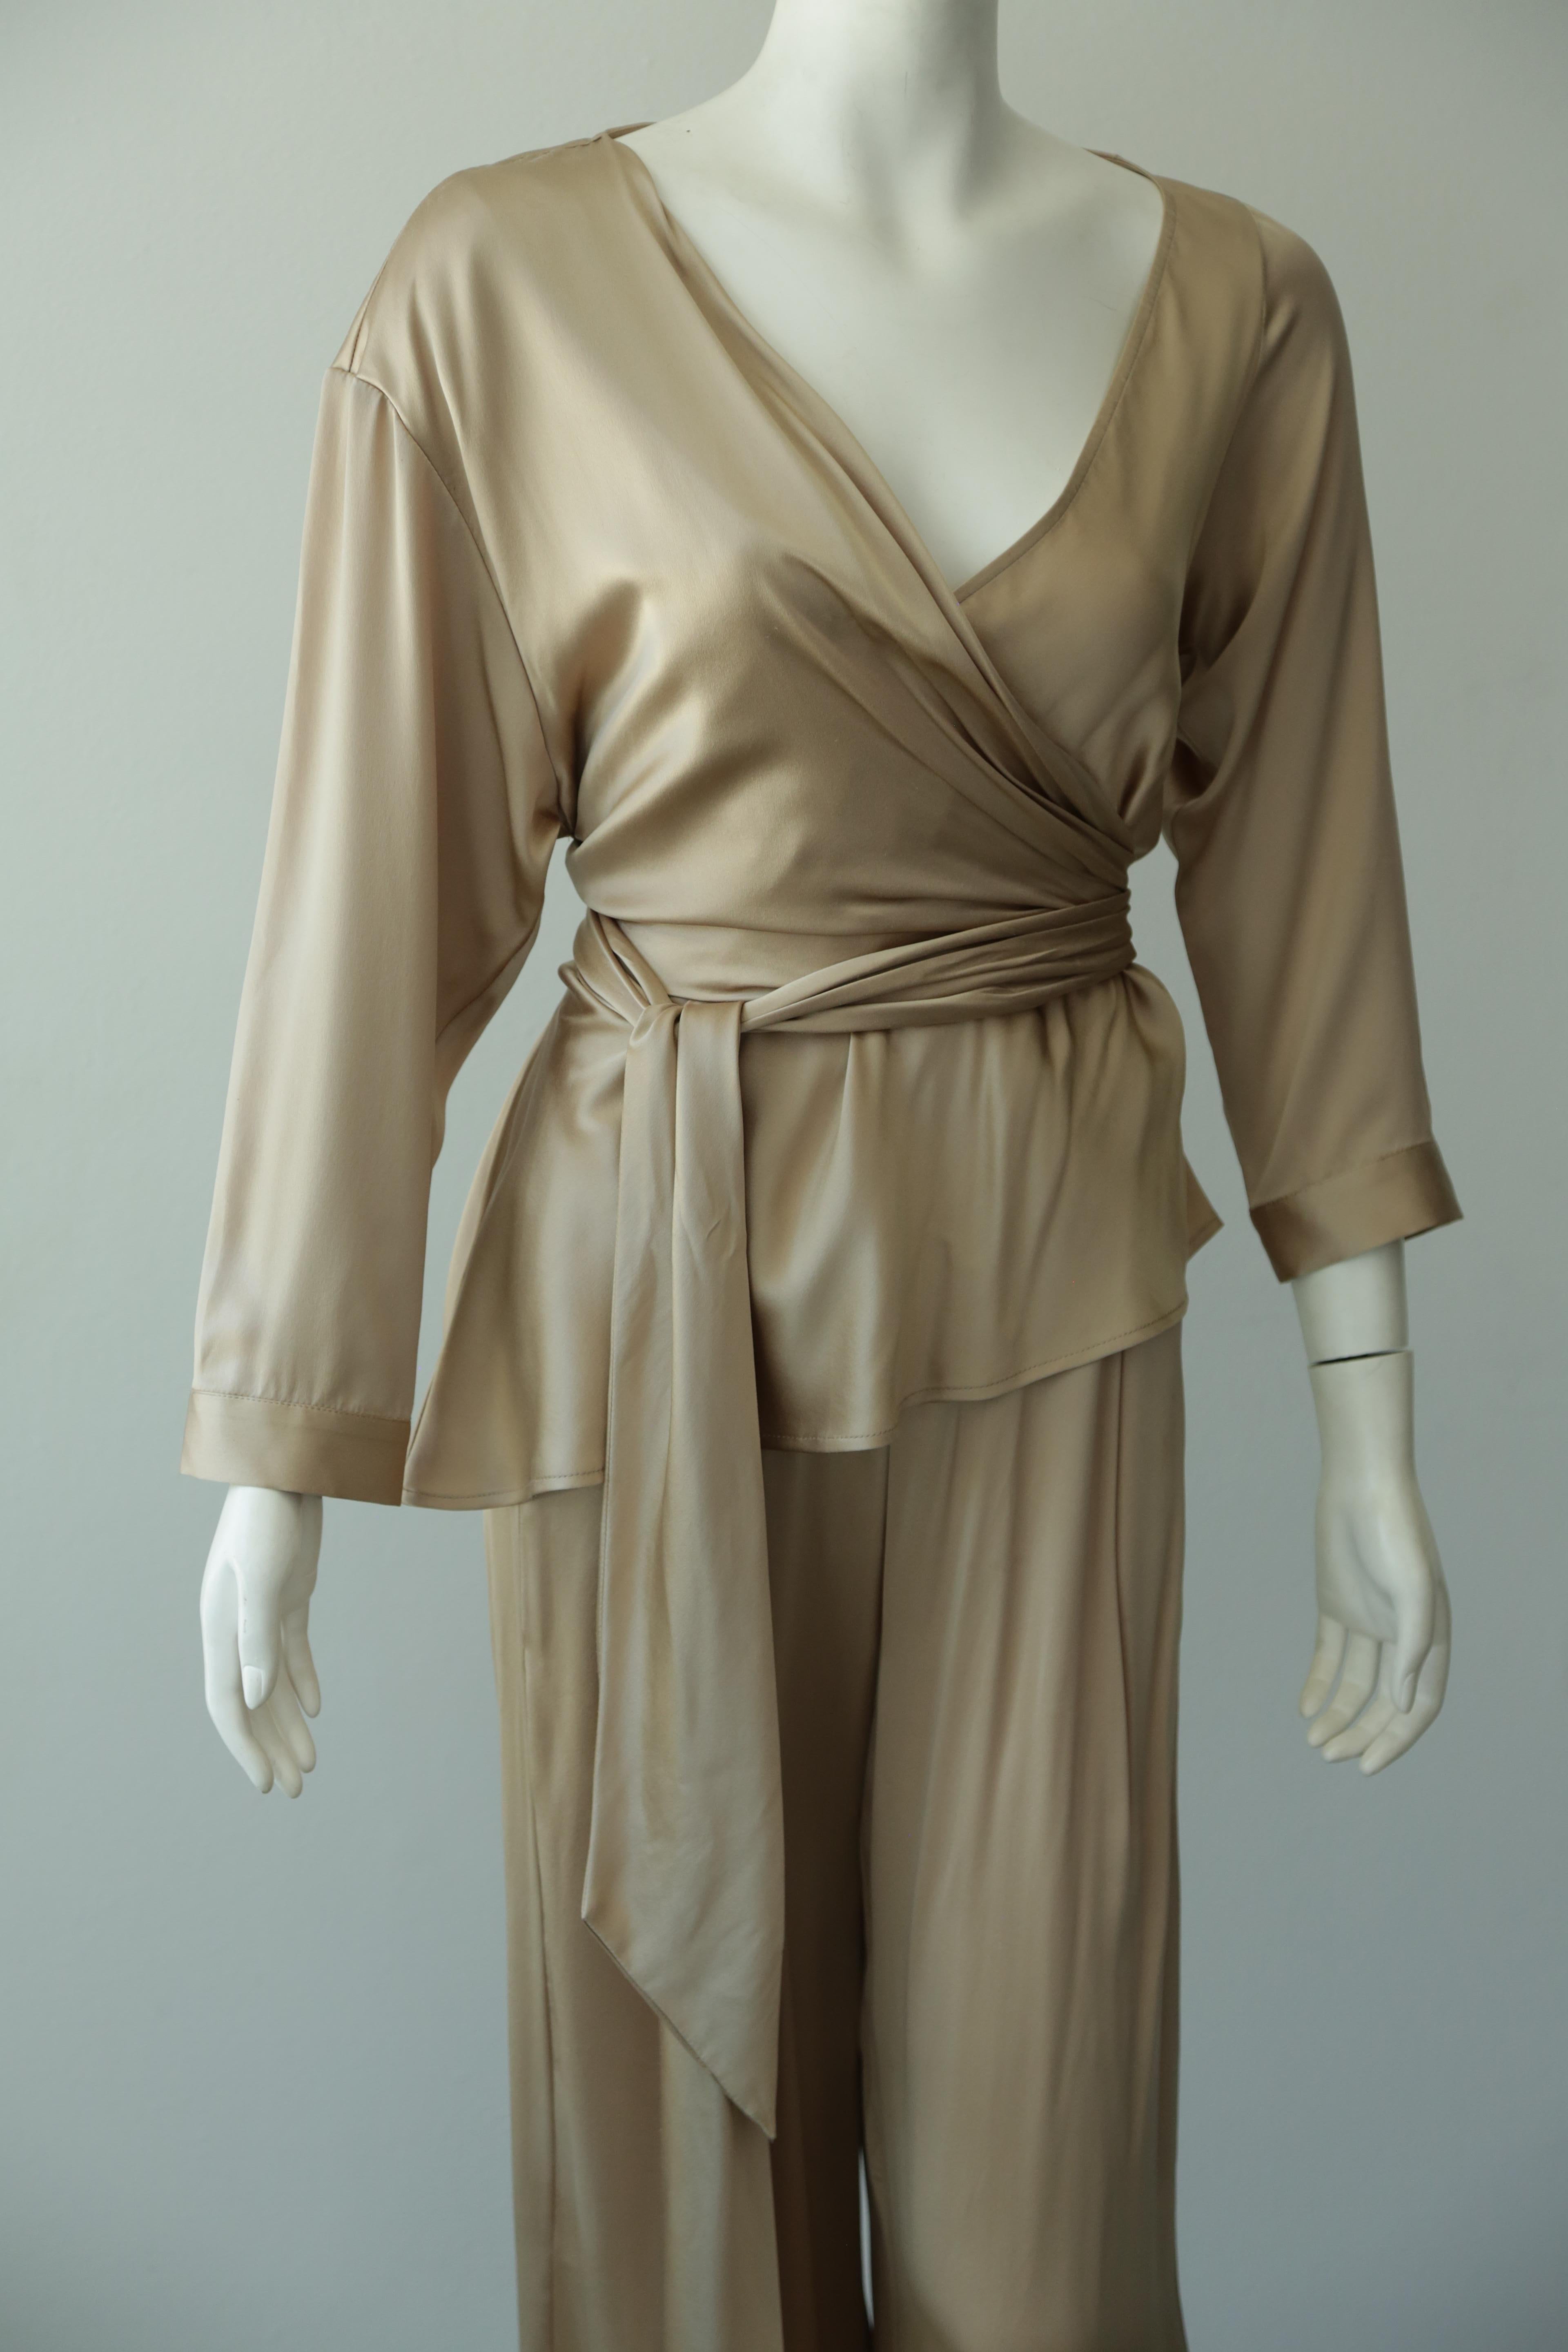 This Michelle Mason Silk , tan/nude pant and top combination is so chic and available in two sizes. Wide leg pants with a button and zipper closure and a top with V-neck and wrap is perfect for any body type. Three quarter length arm. 

Available in